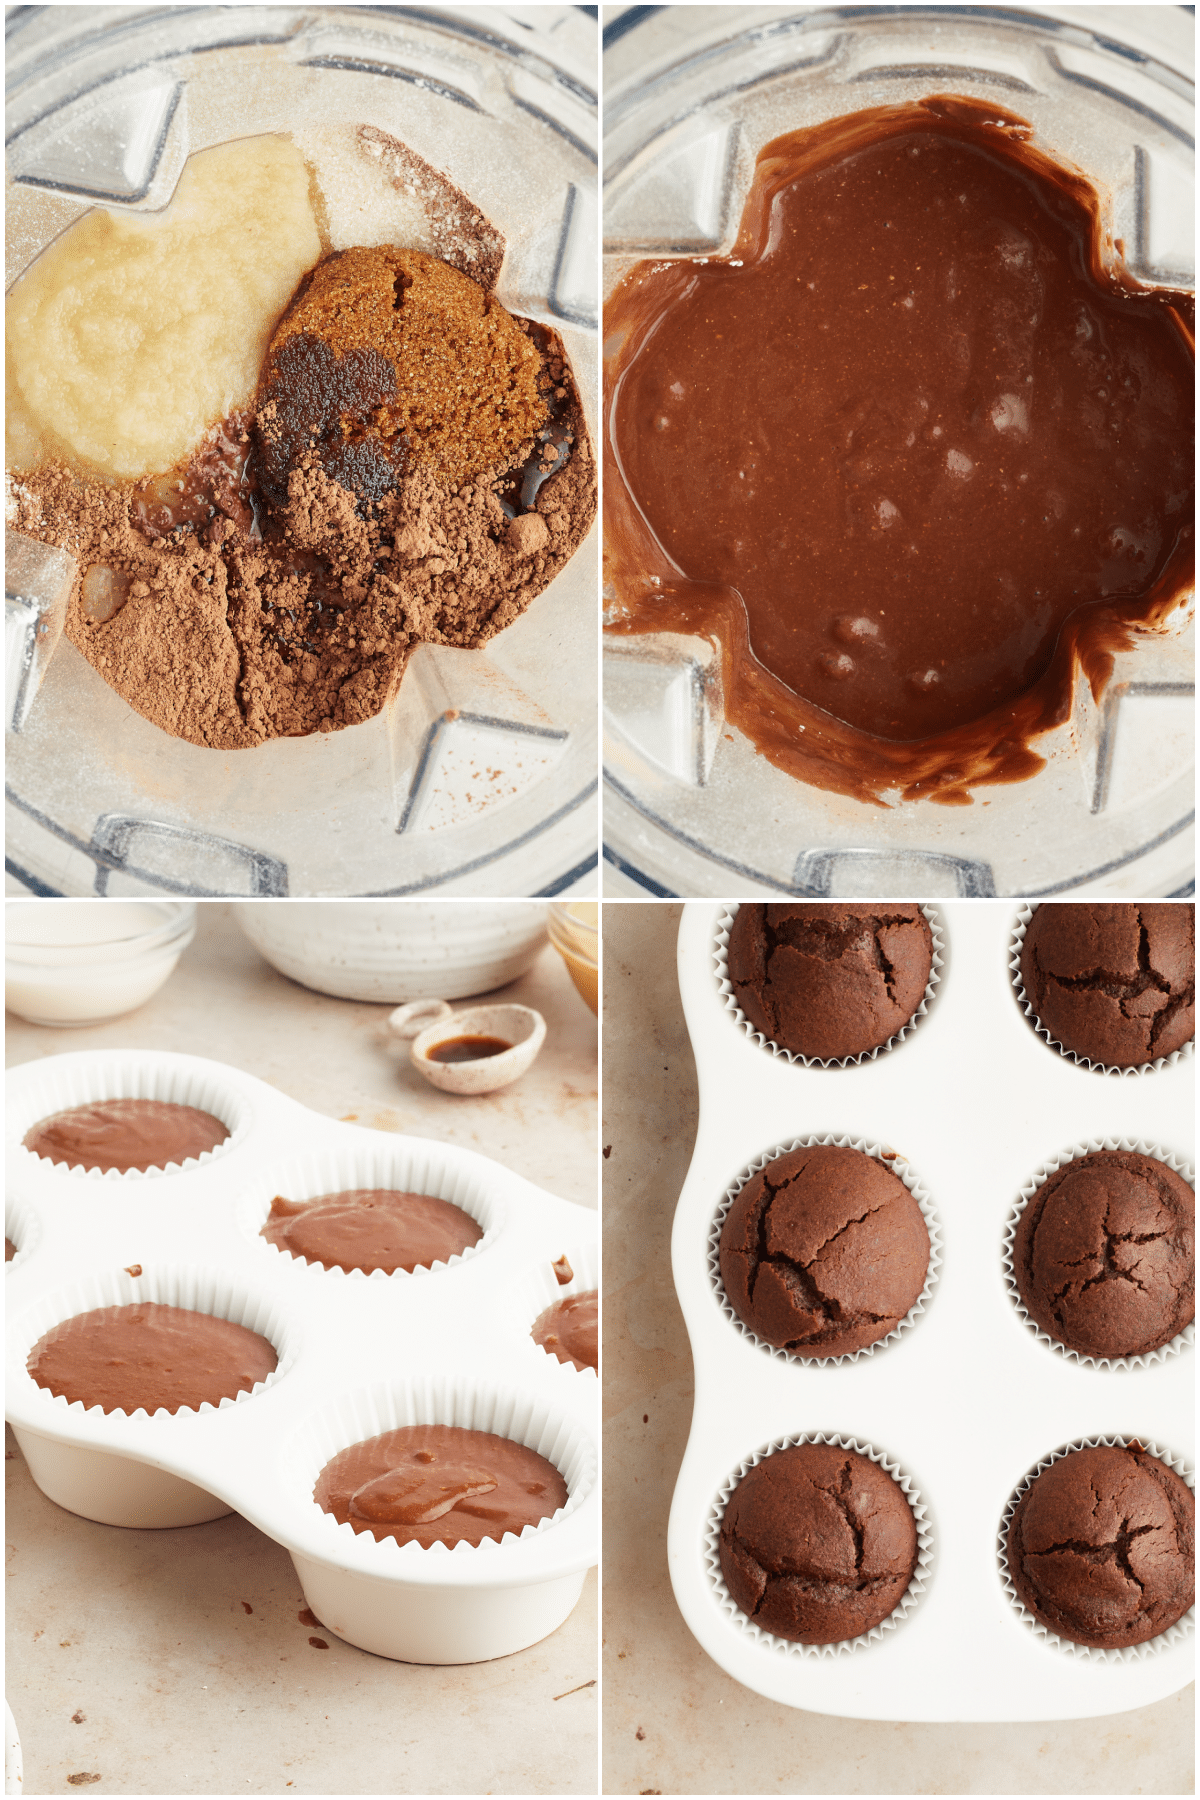 A four image collage showing how to make chocolate cupcakes: combine the wet ingredients, add the dry ingredients, divide into a paper lined cupcake tin, bake.